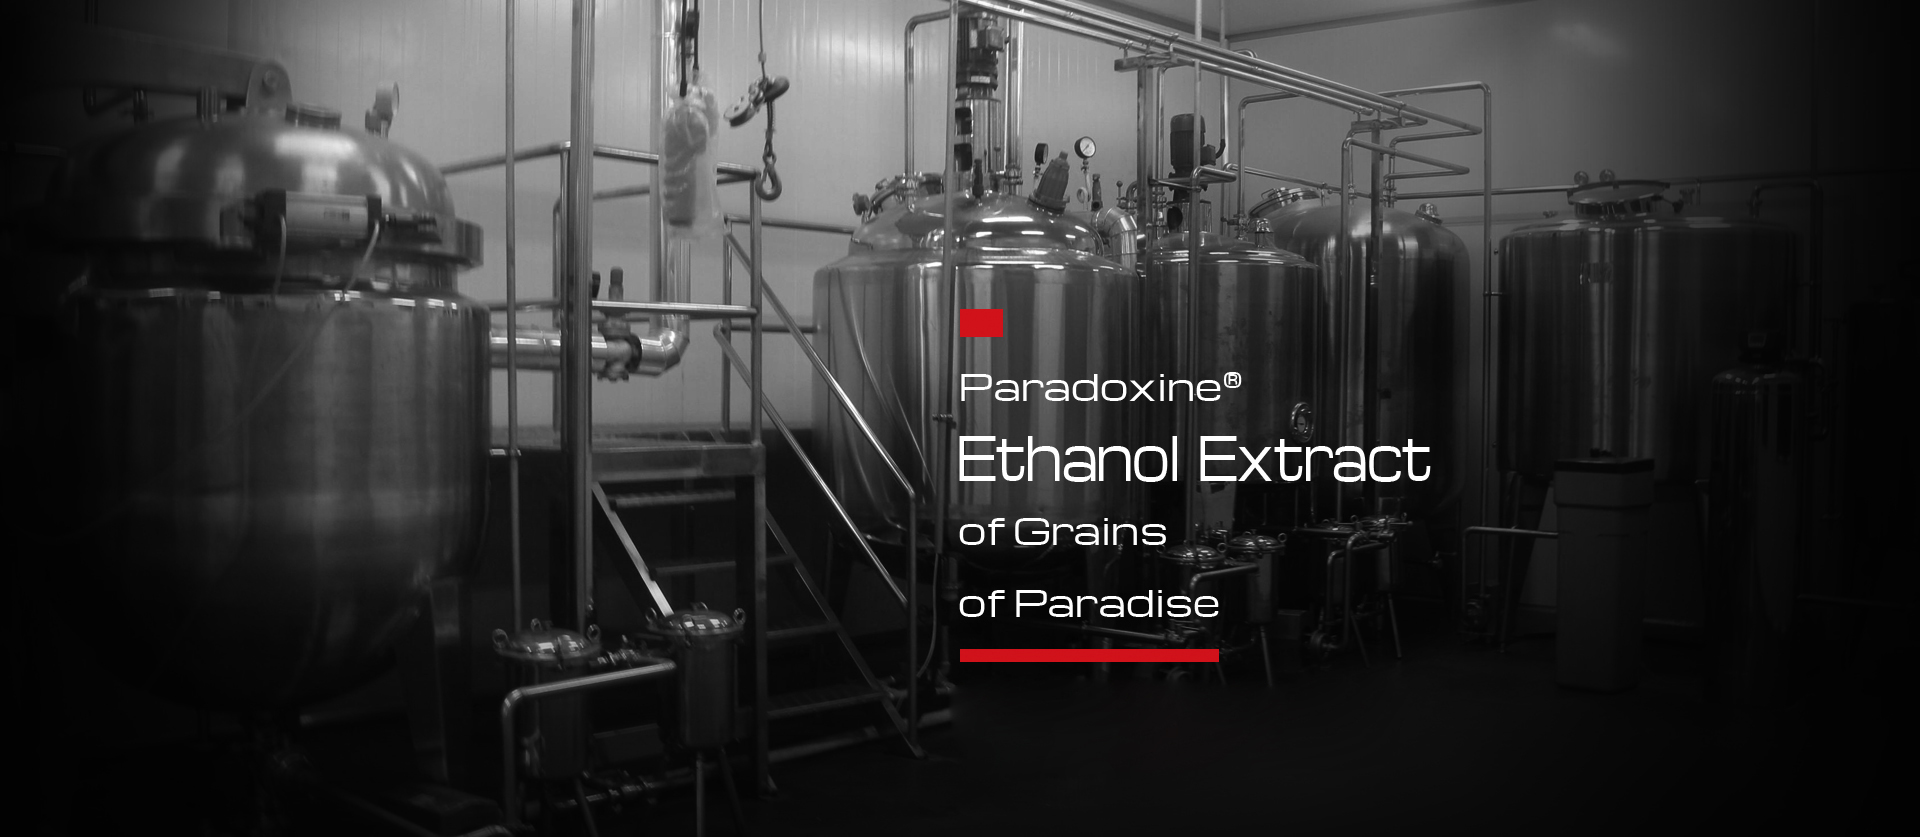 Paradoxine Ethanol Extract of Grains of Paradise